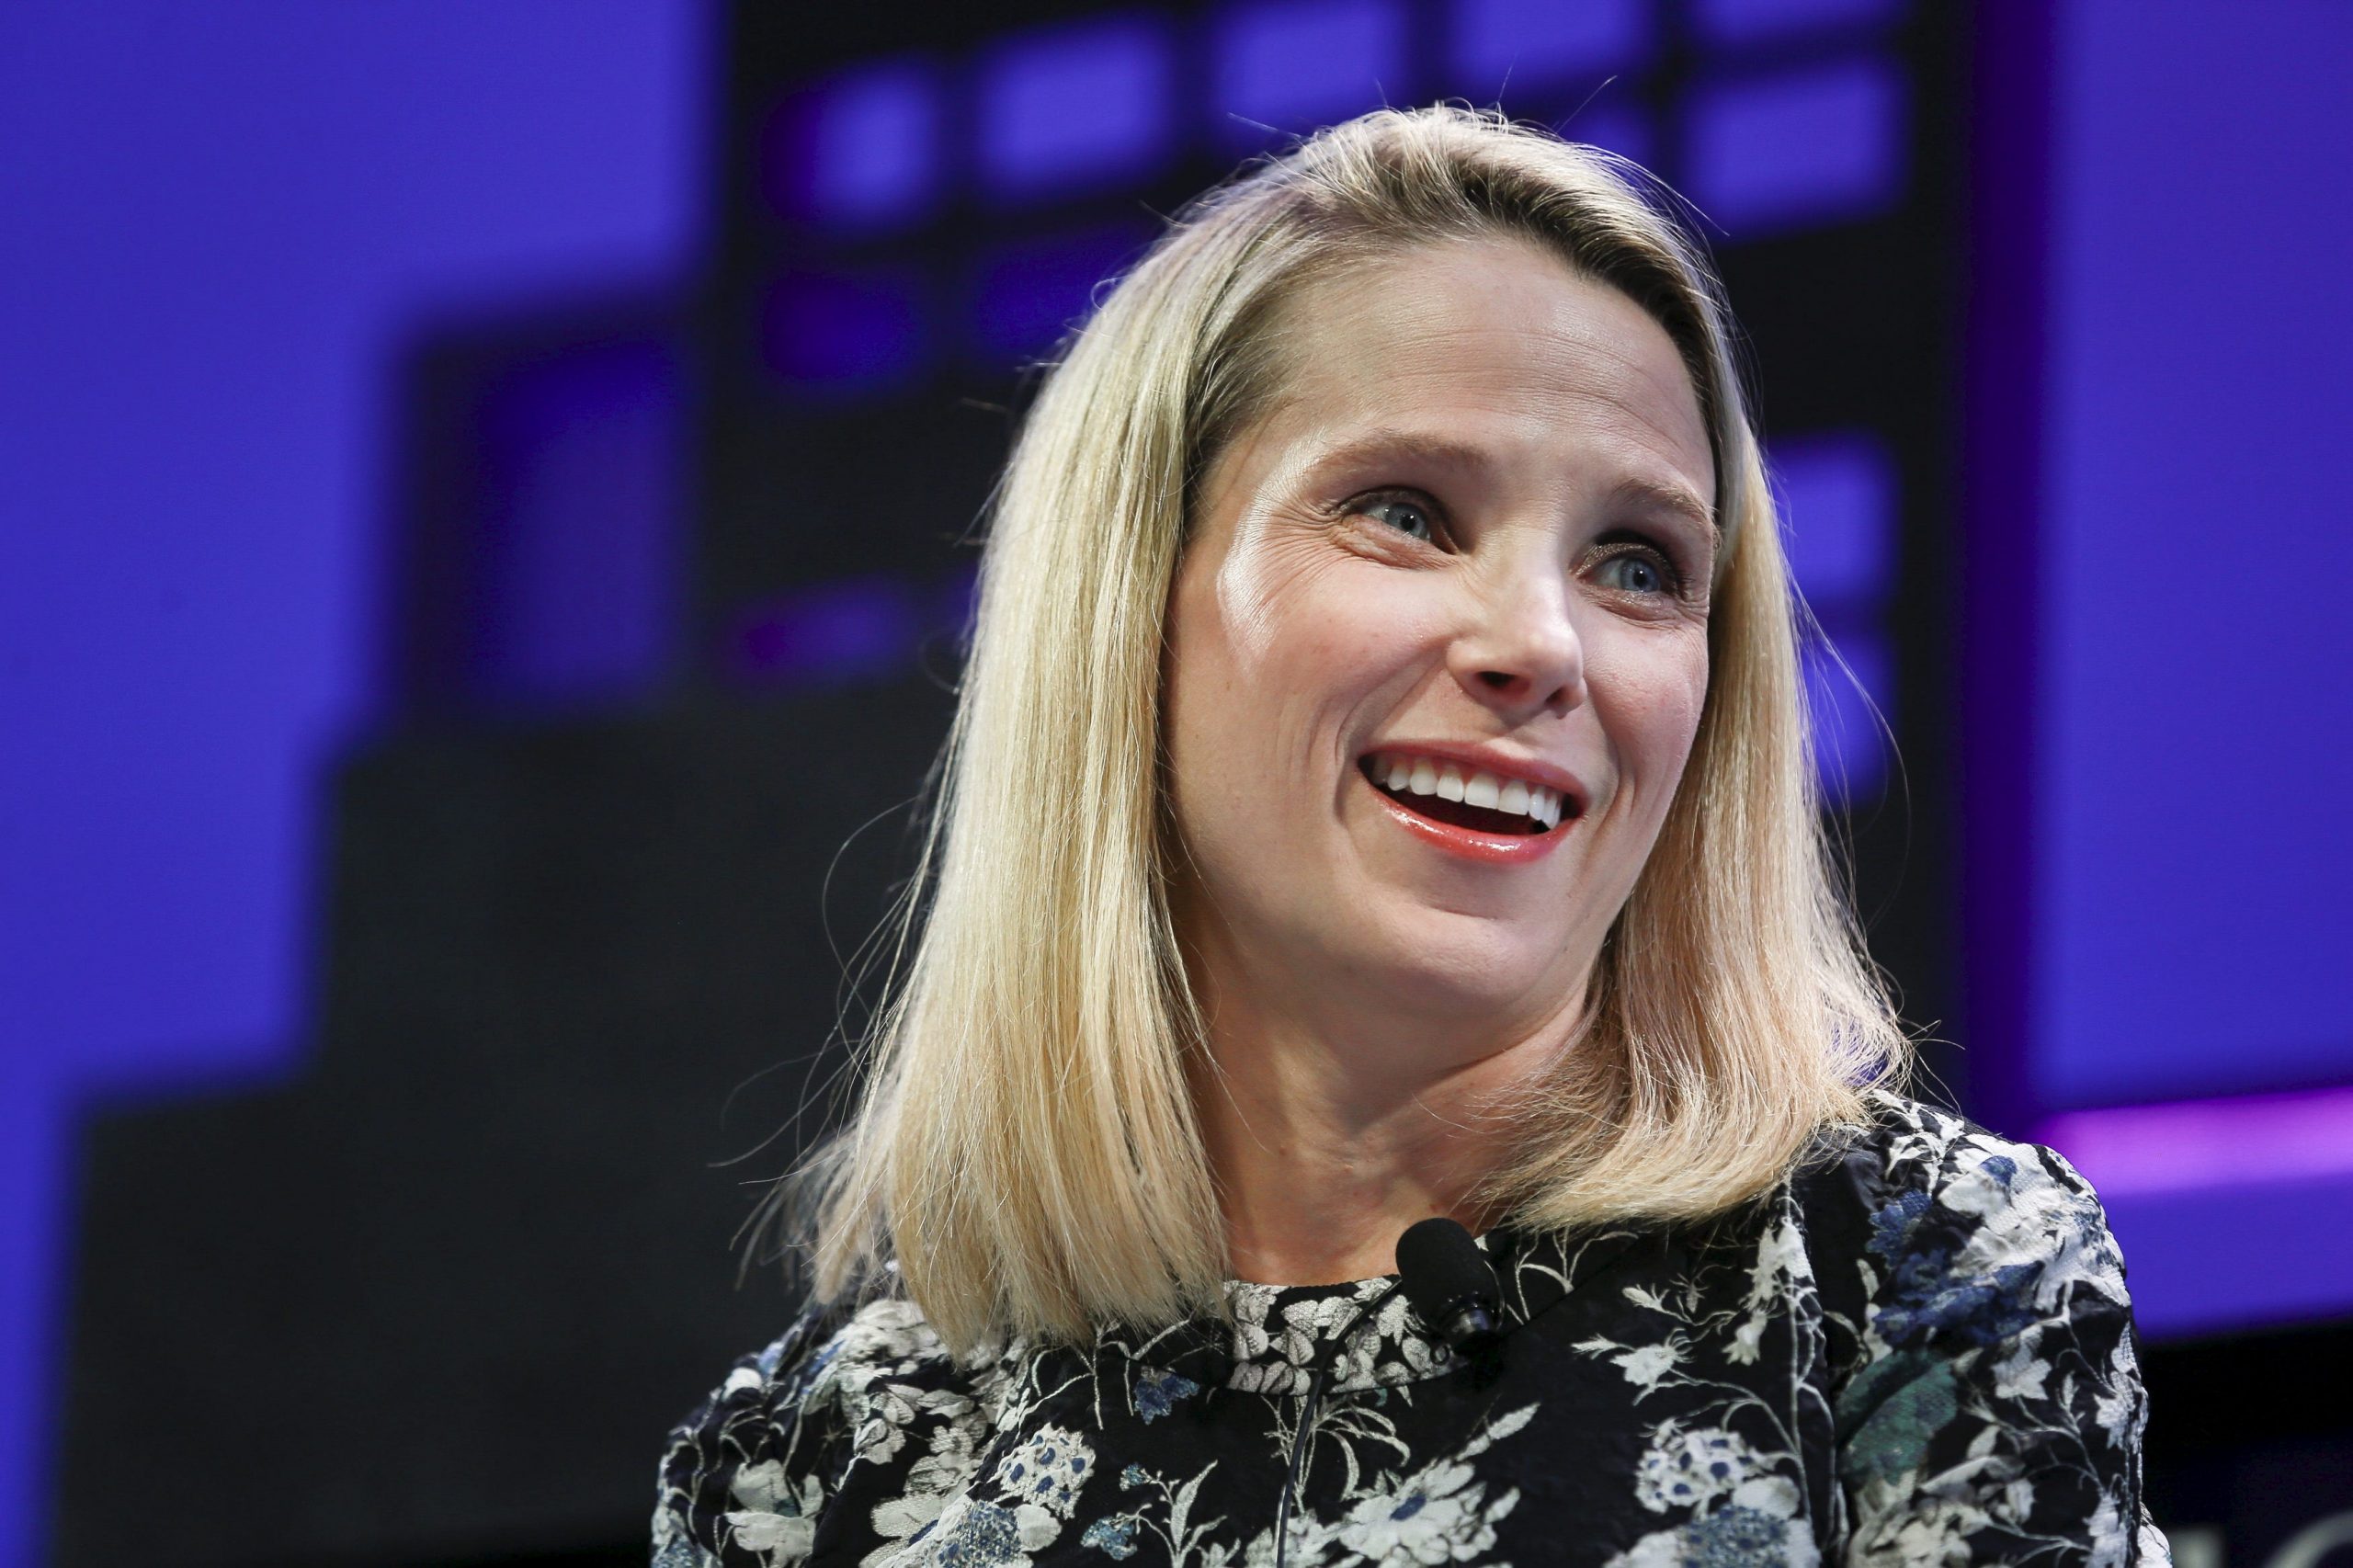 Marissa Mayer as Yahoo President and CEO in 2015